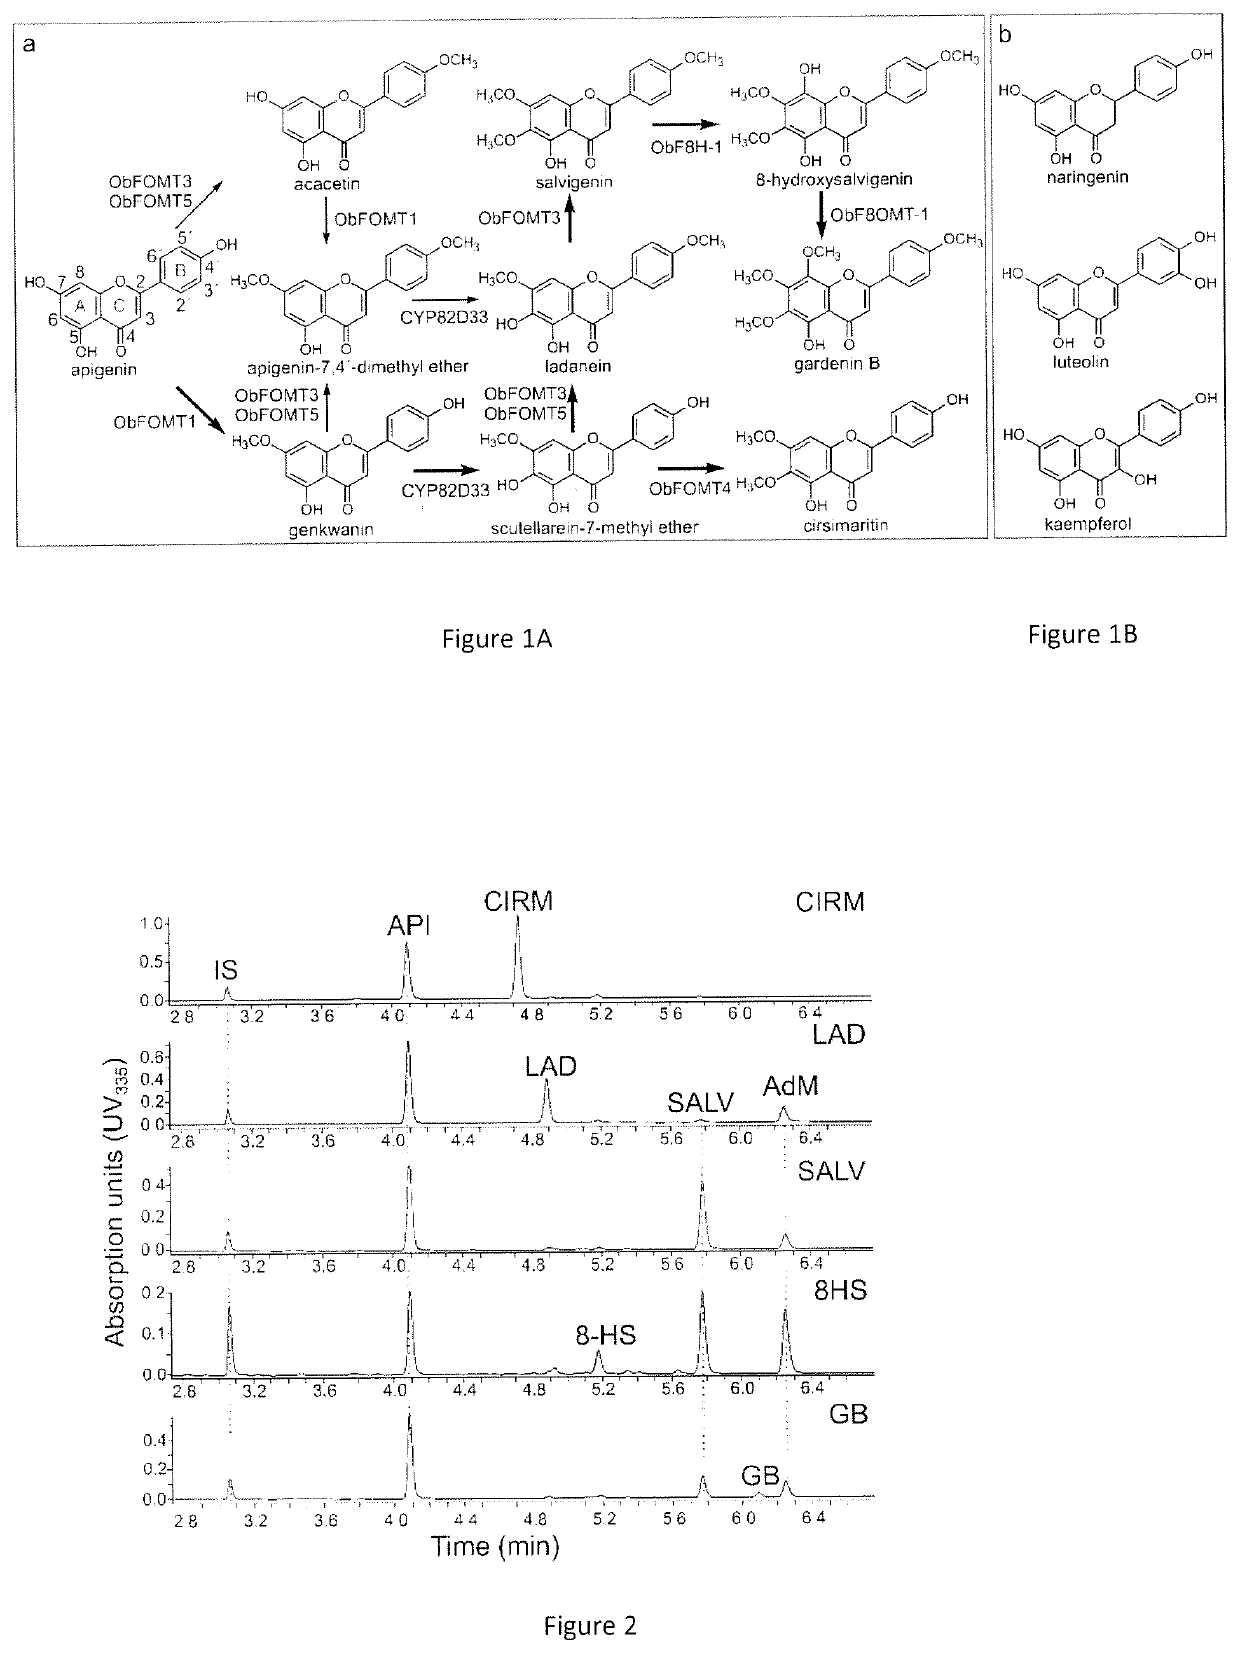 Production of hydroxylated and methoxylated flavonoids in yeast by expression specific enzymes